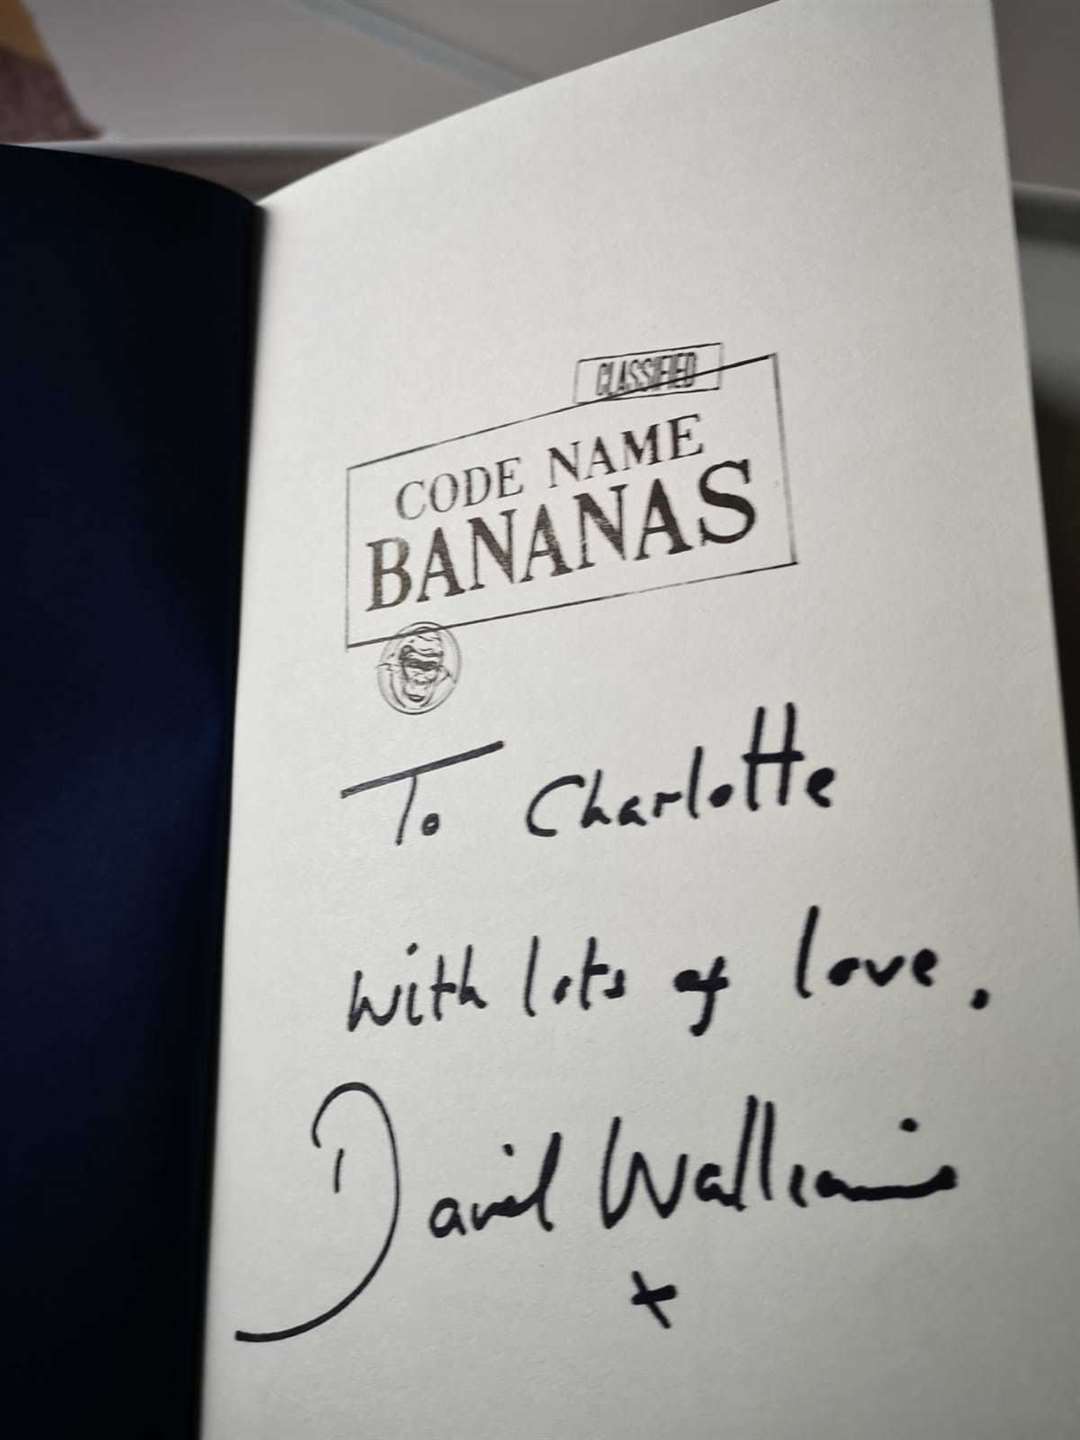 David Walliams also signed one of his books within the parcel of gifts